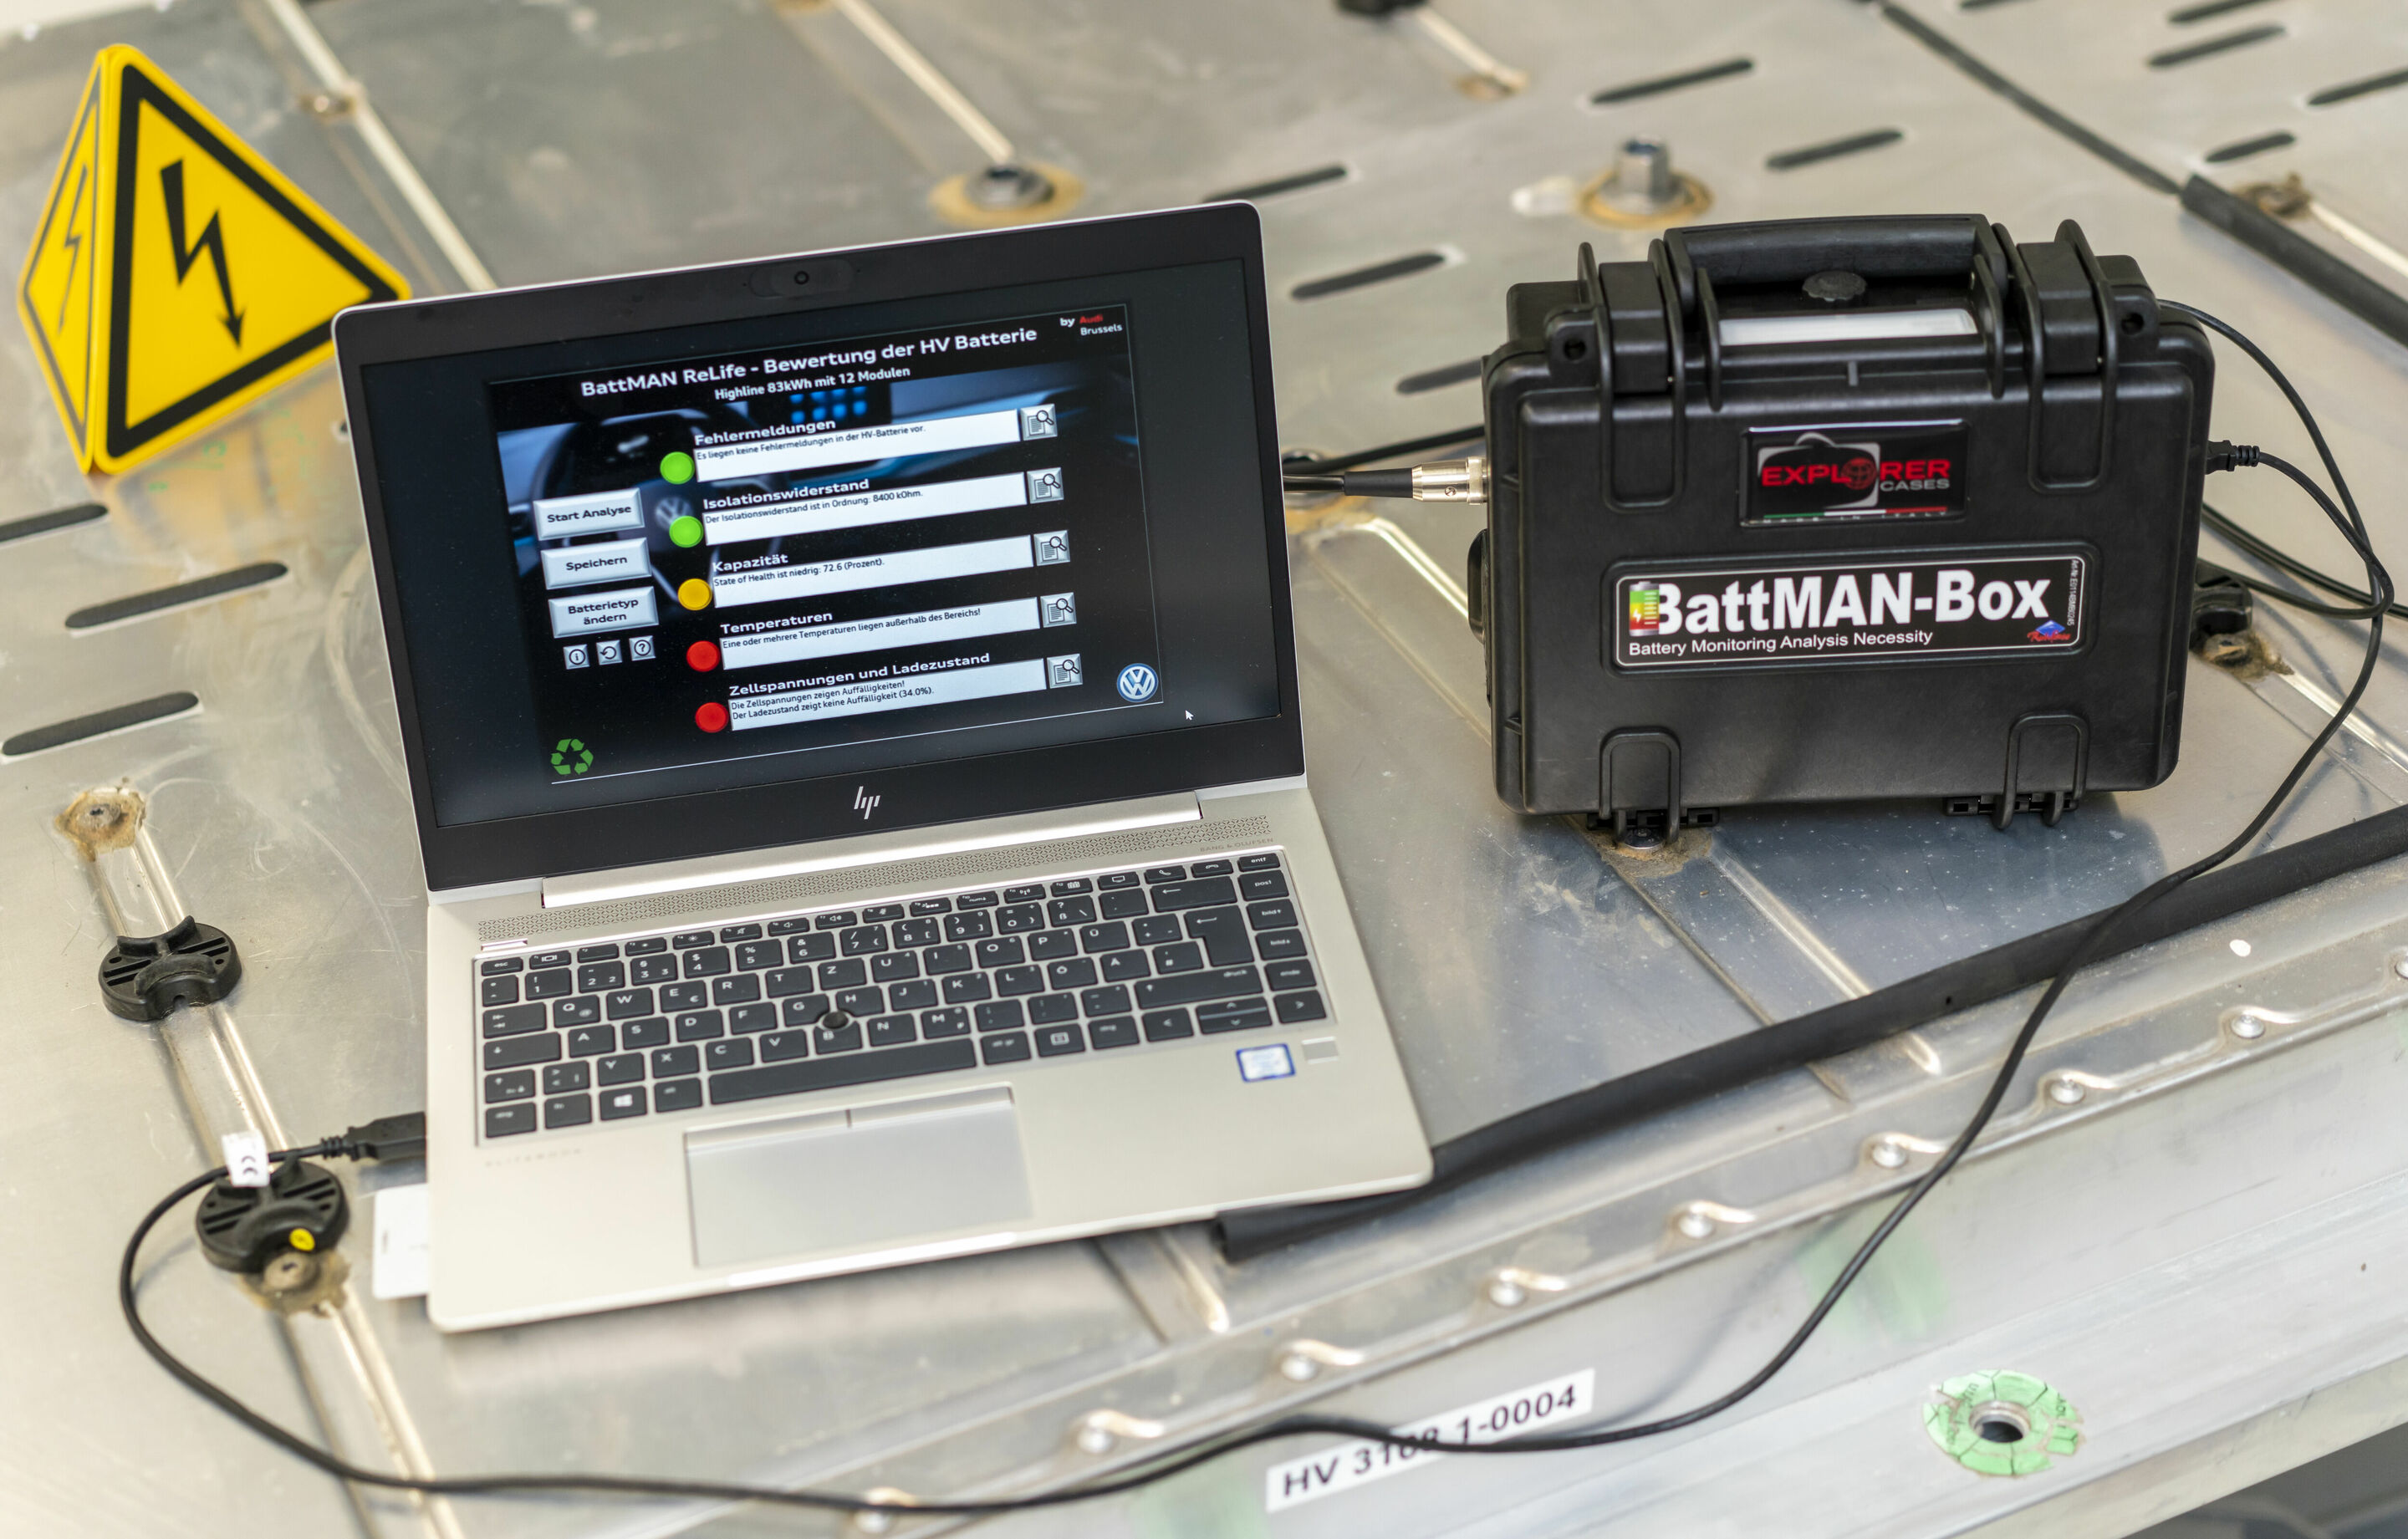 Second life or recycling? BattMAN rescues batteries from a needlessly short lifespan!